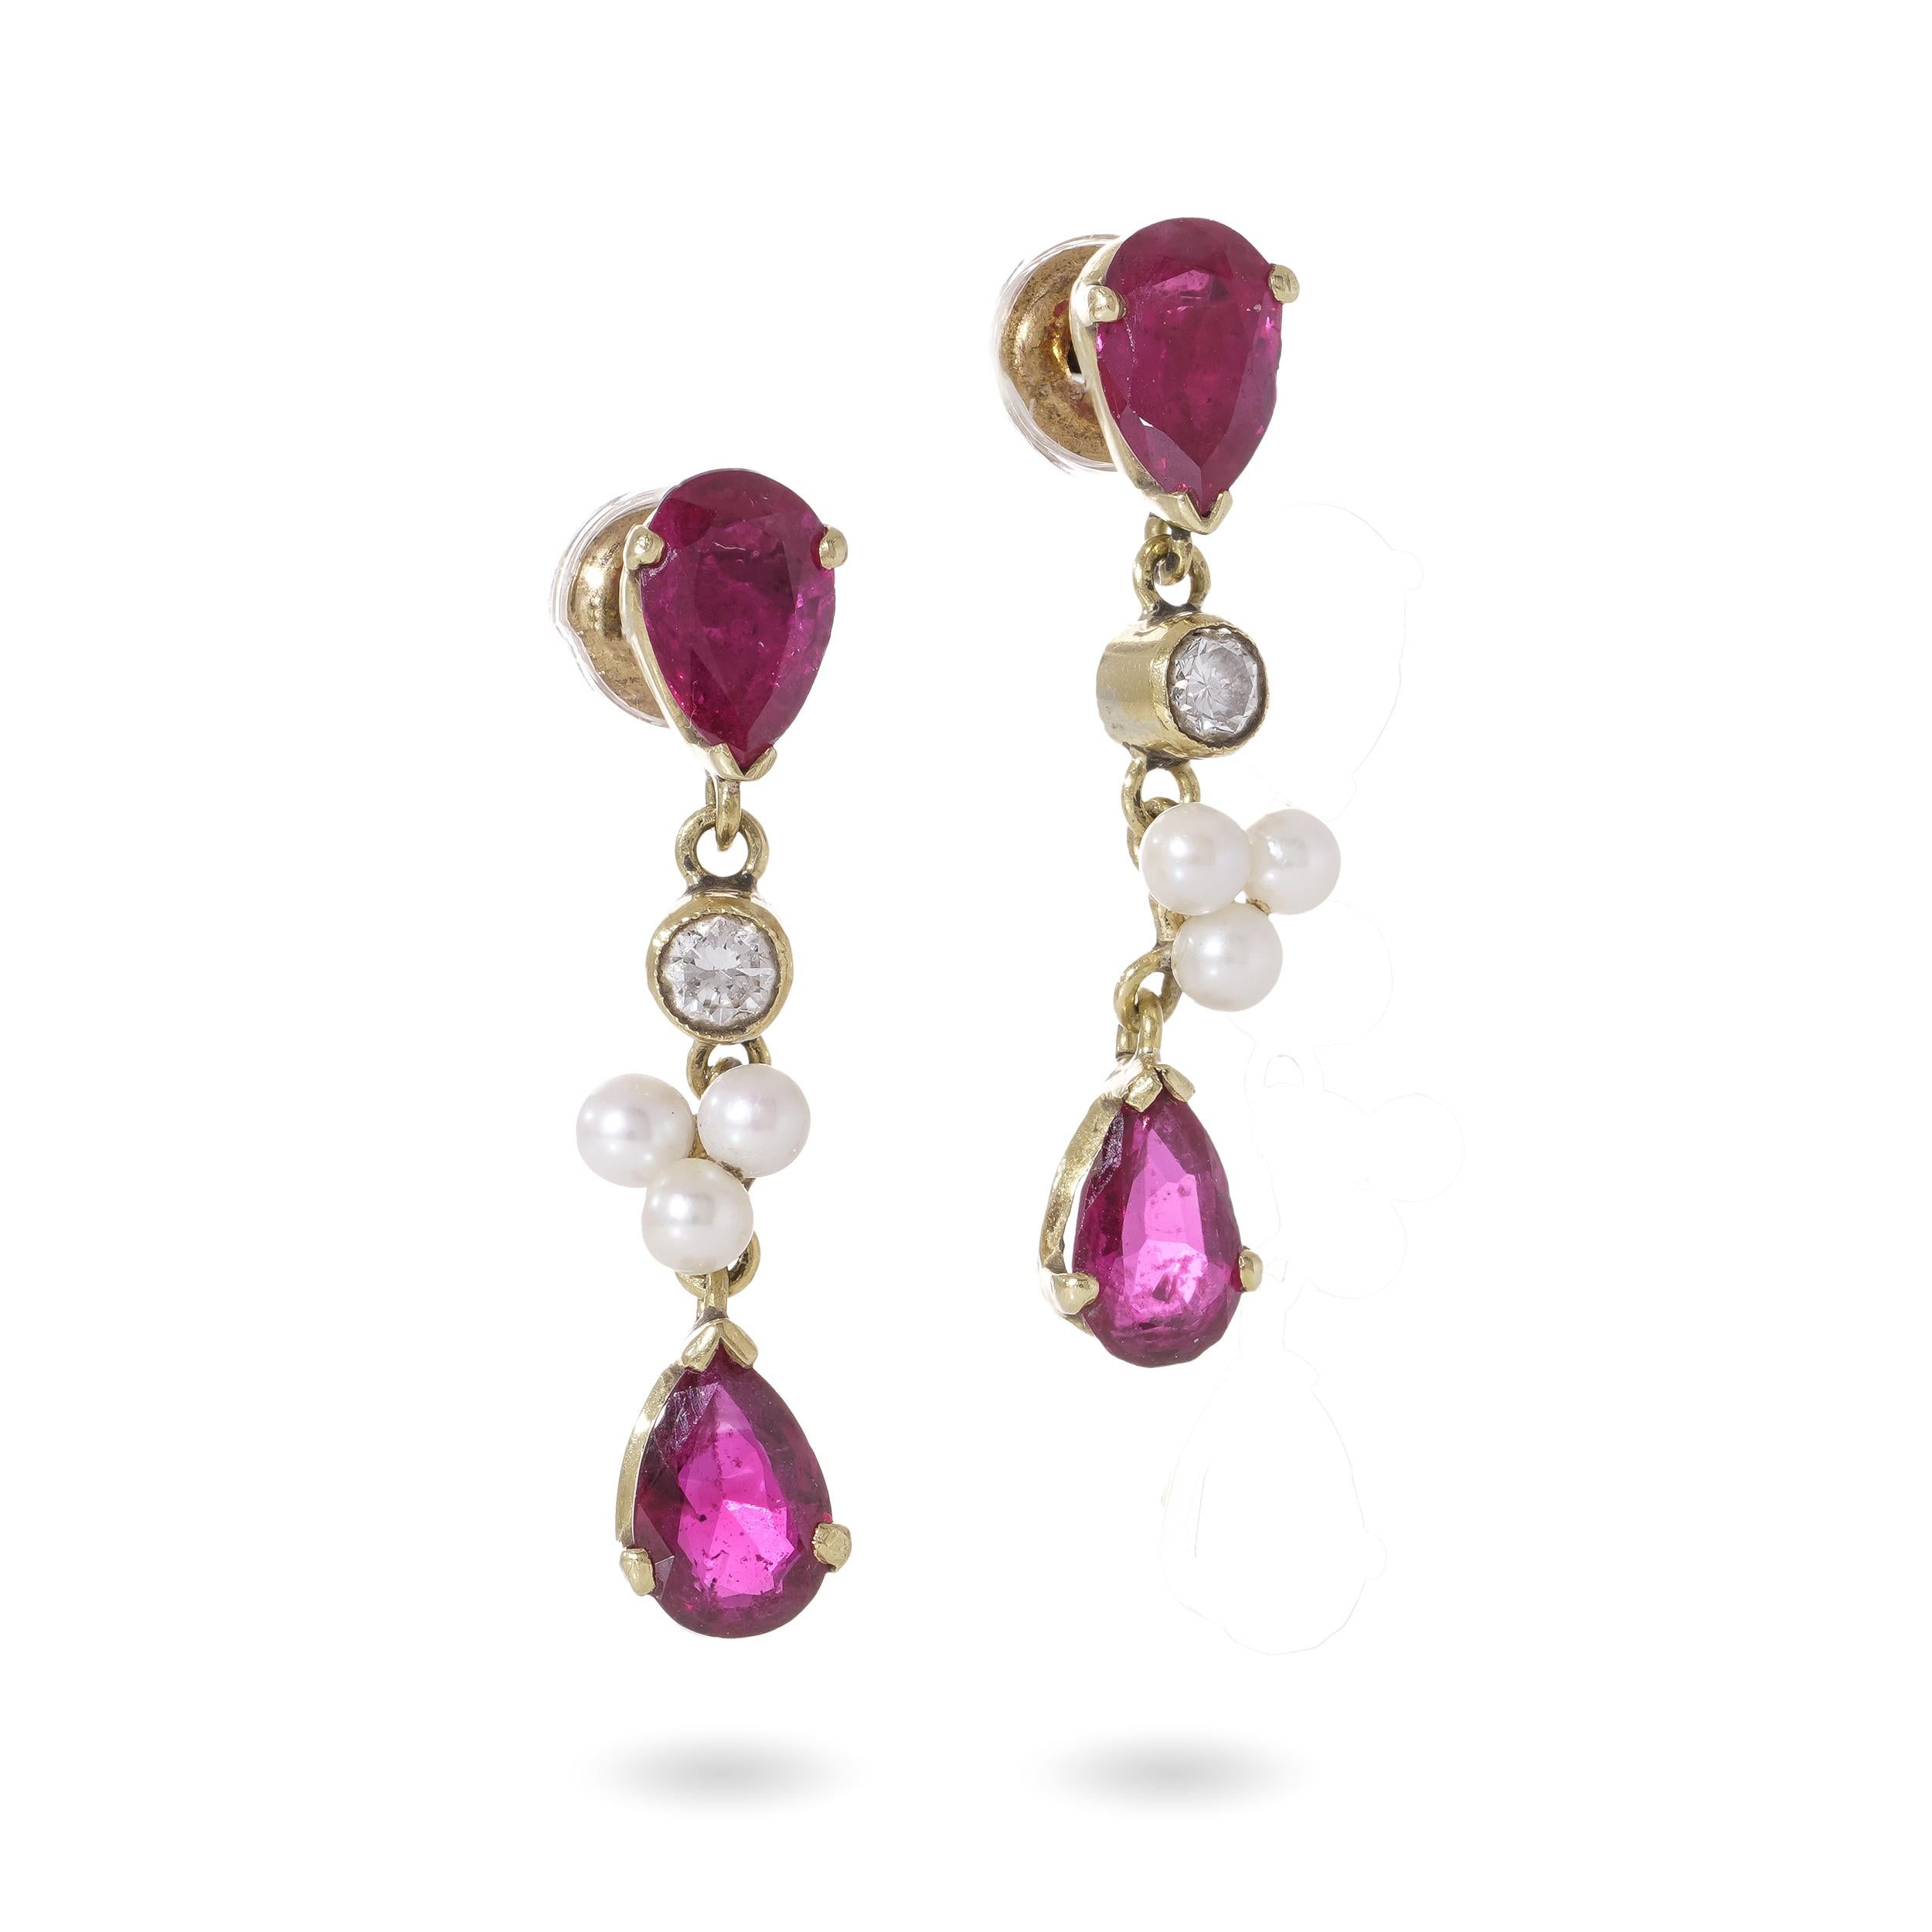 Vintage 18kt. yellow gold pair of drop earrings set with natural Burma rubies, diamonds and pearls.
 X-ray Tested positive for 18kt. gold. 

Dimensions:
Size: 2.2 x 0.4 cm
Weight: 3.00 grams

Burma Rubies  -
Quantity of stones:4 
Cut: Pear  
Approx.